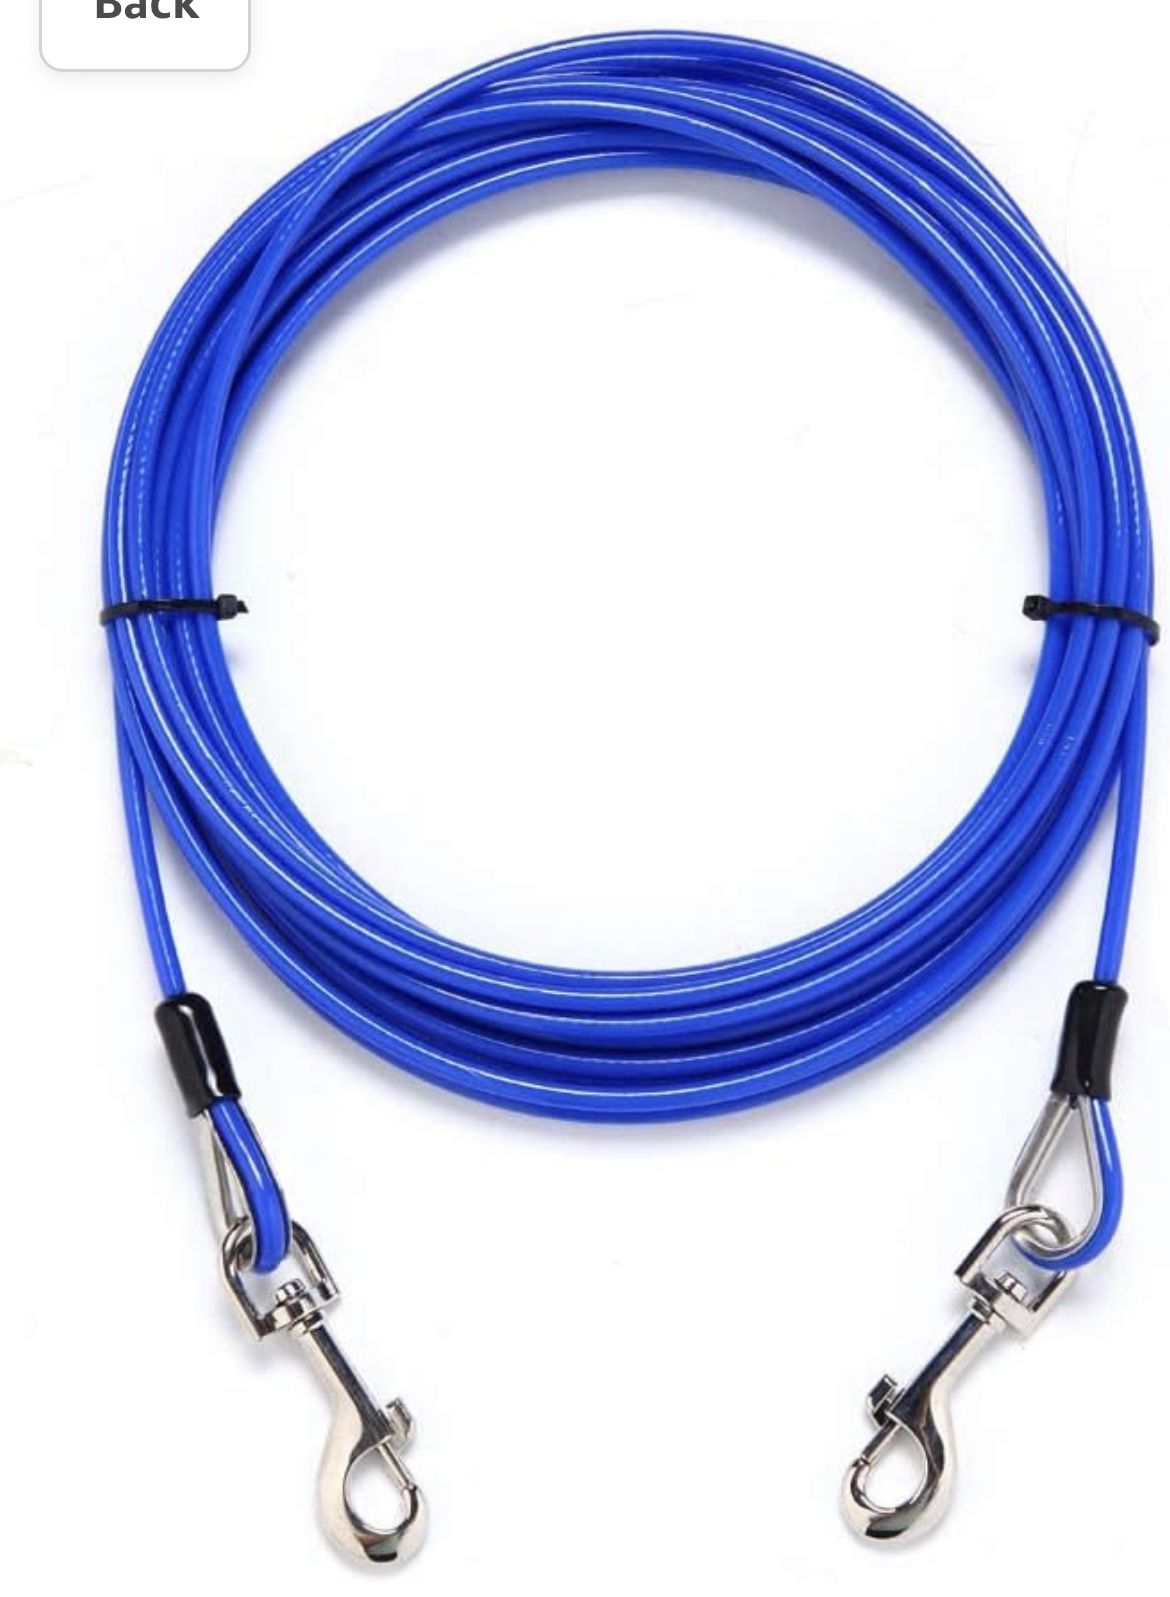 25ft Dog Tie Out Cable Galvanized Steel Wire Rope with PVC Coating for Medium Dogs up to 396Ibs, Diode Blue